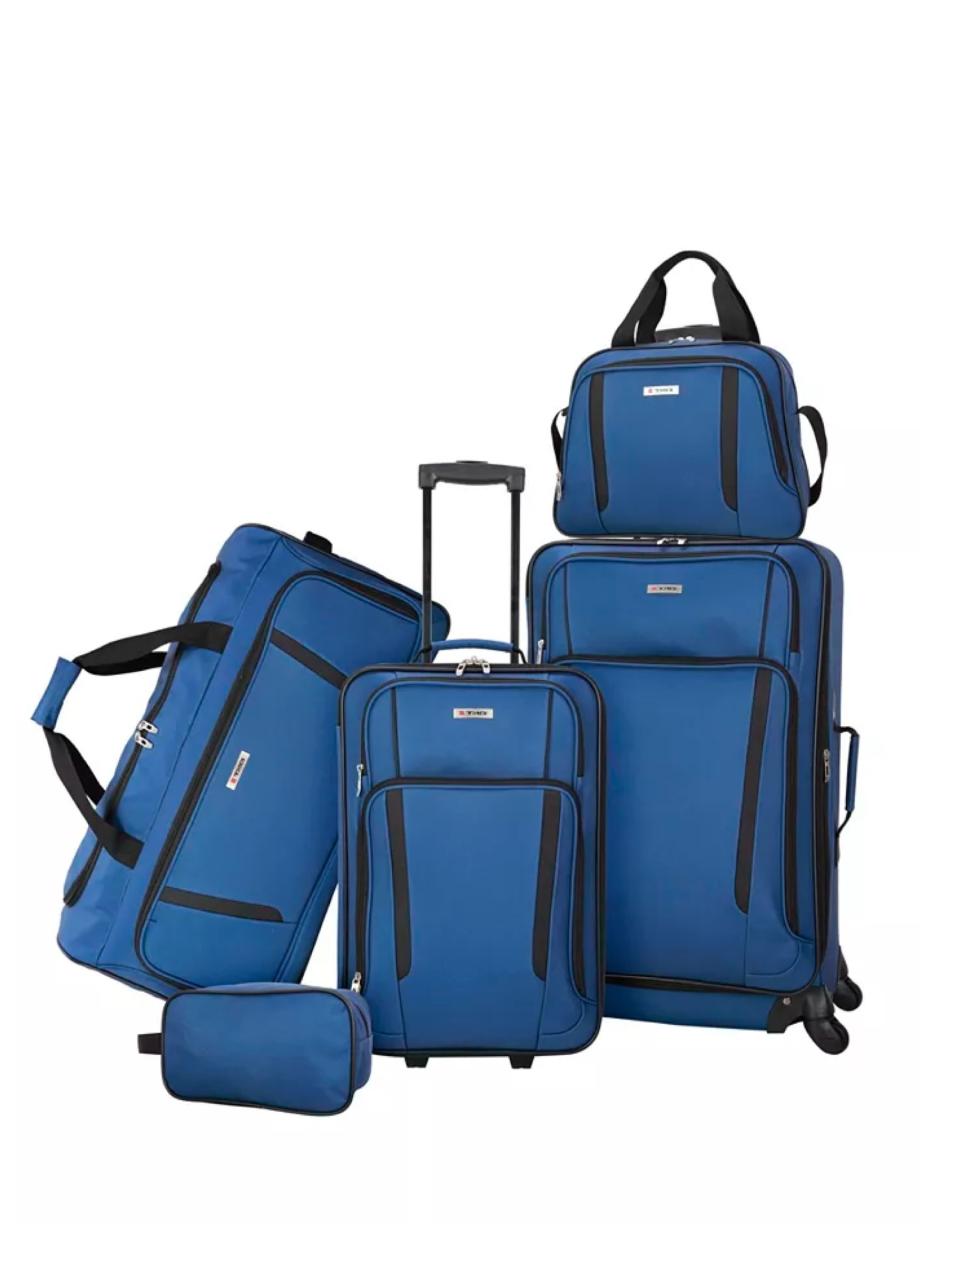 A five-piece set of various sized suitcases next to another